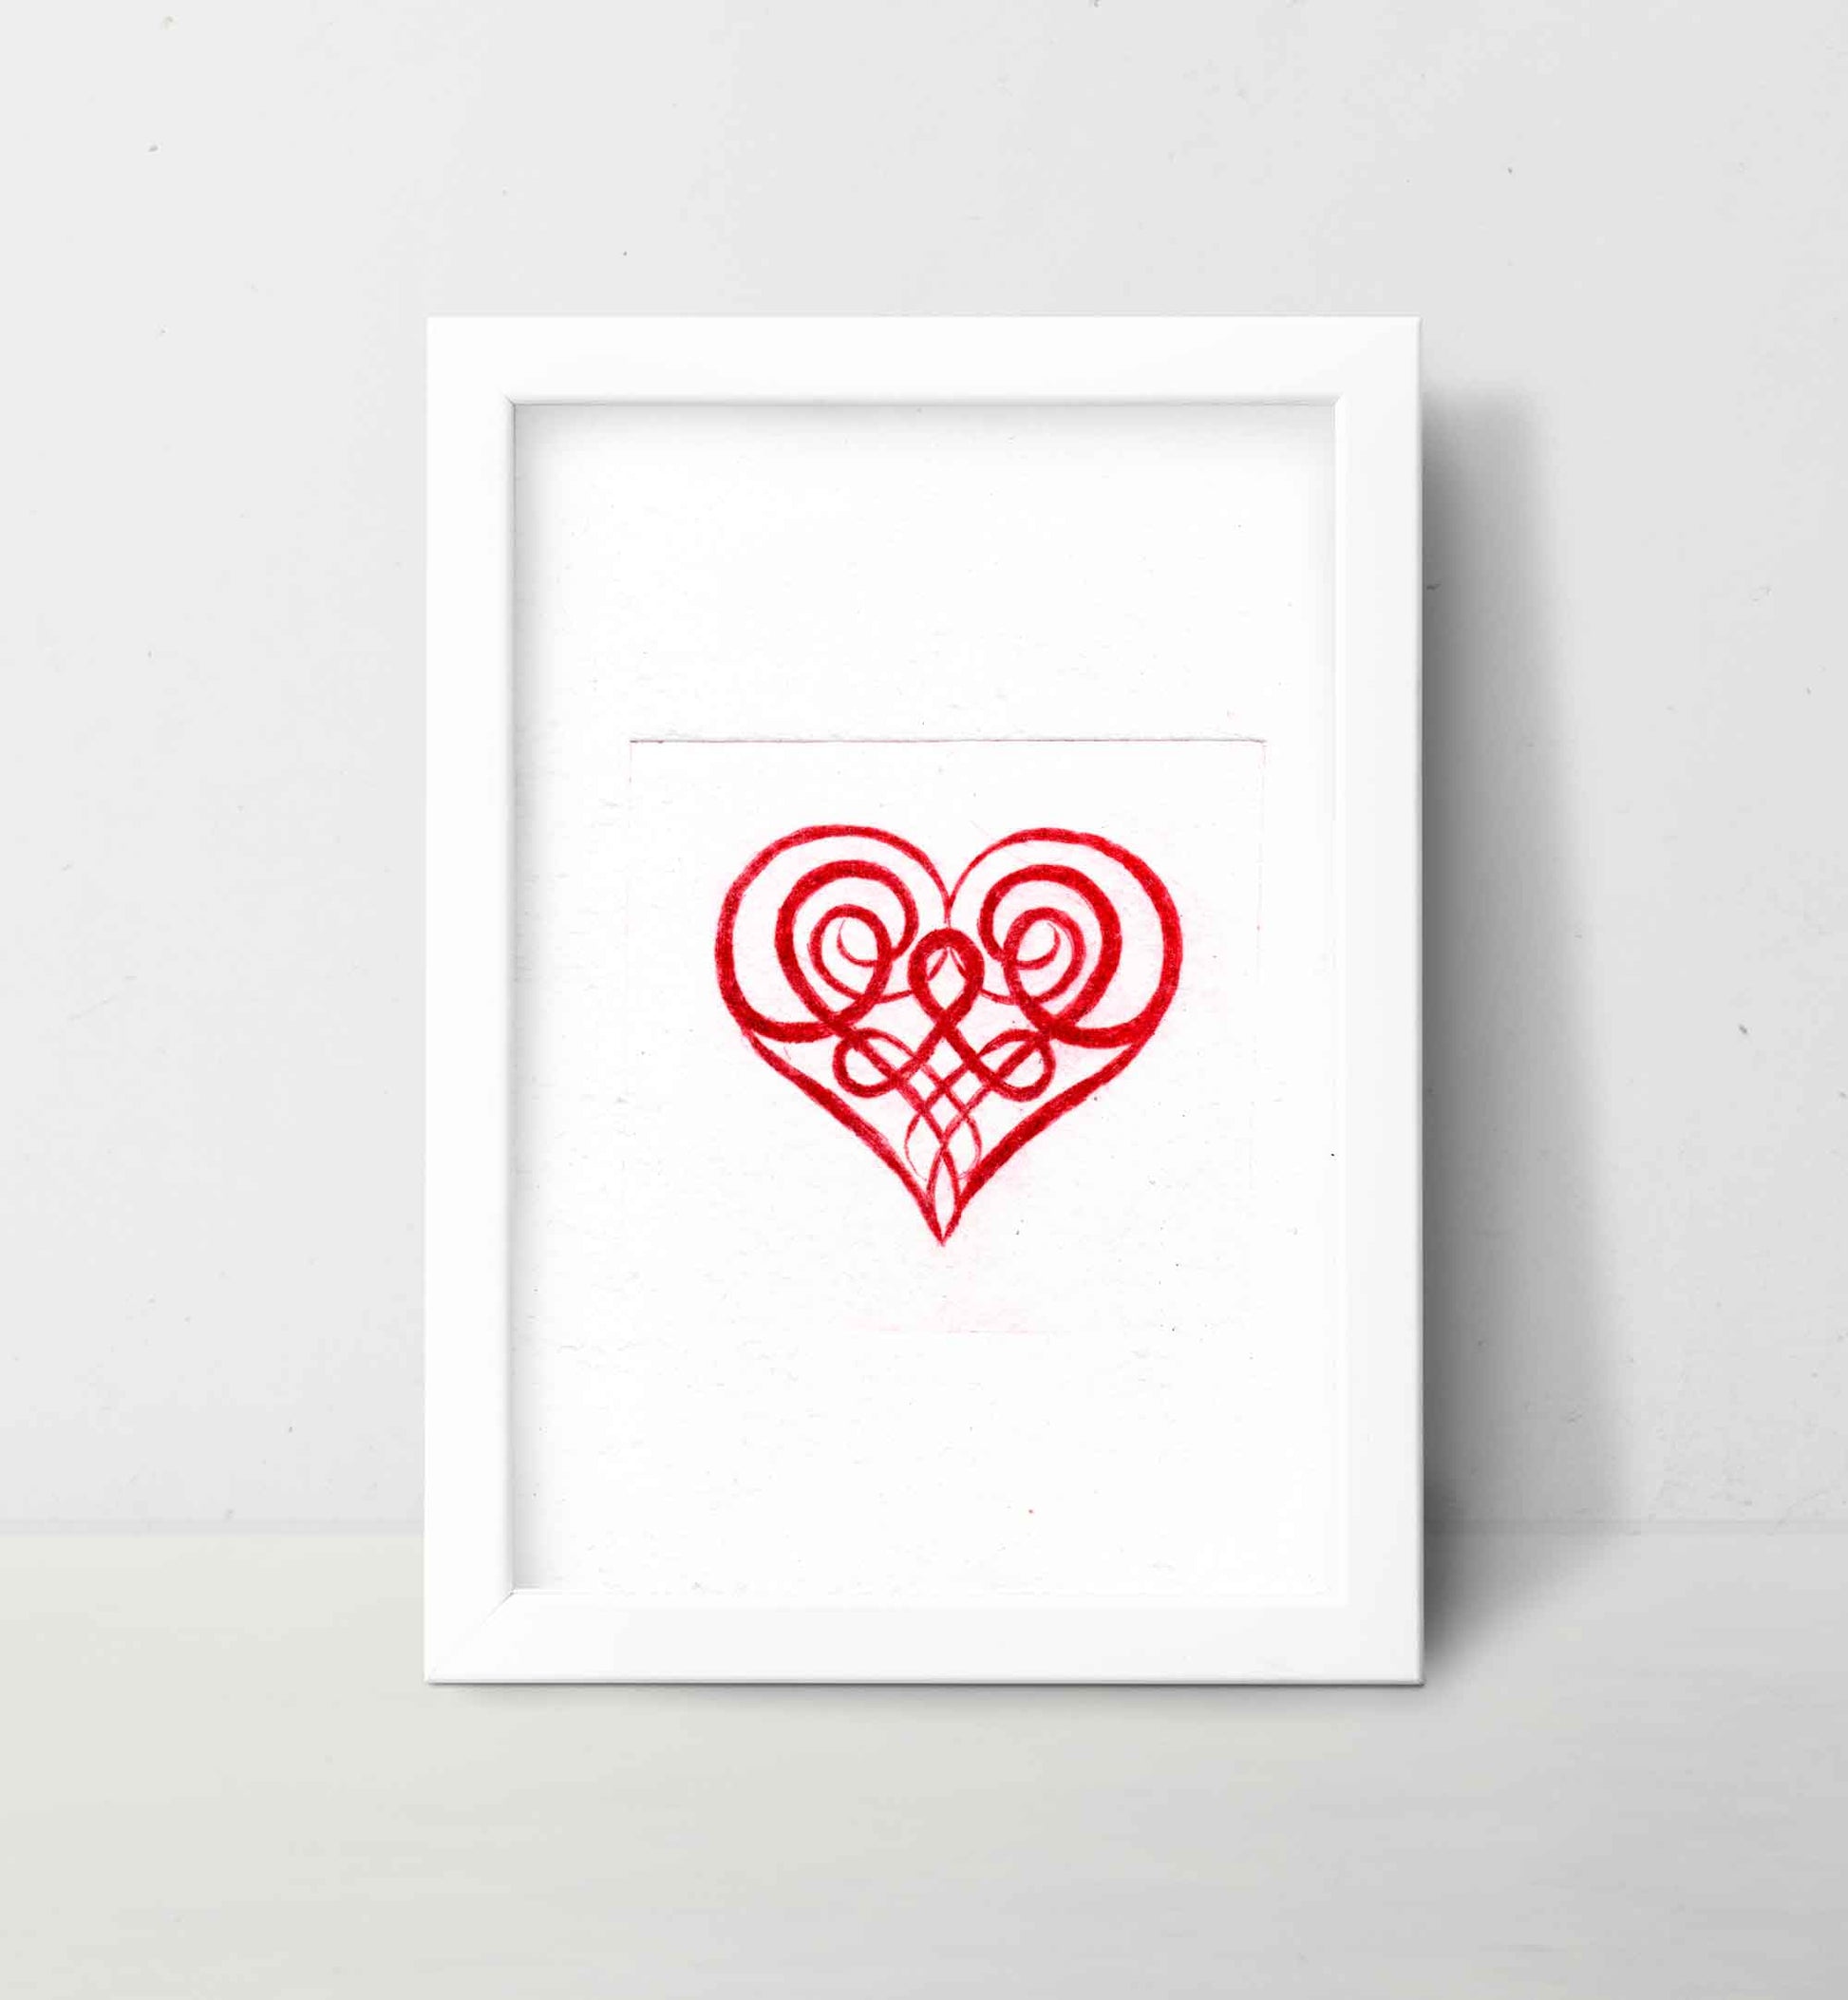 Red Celtic Knot Heart on white background